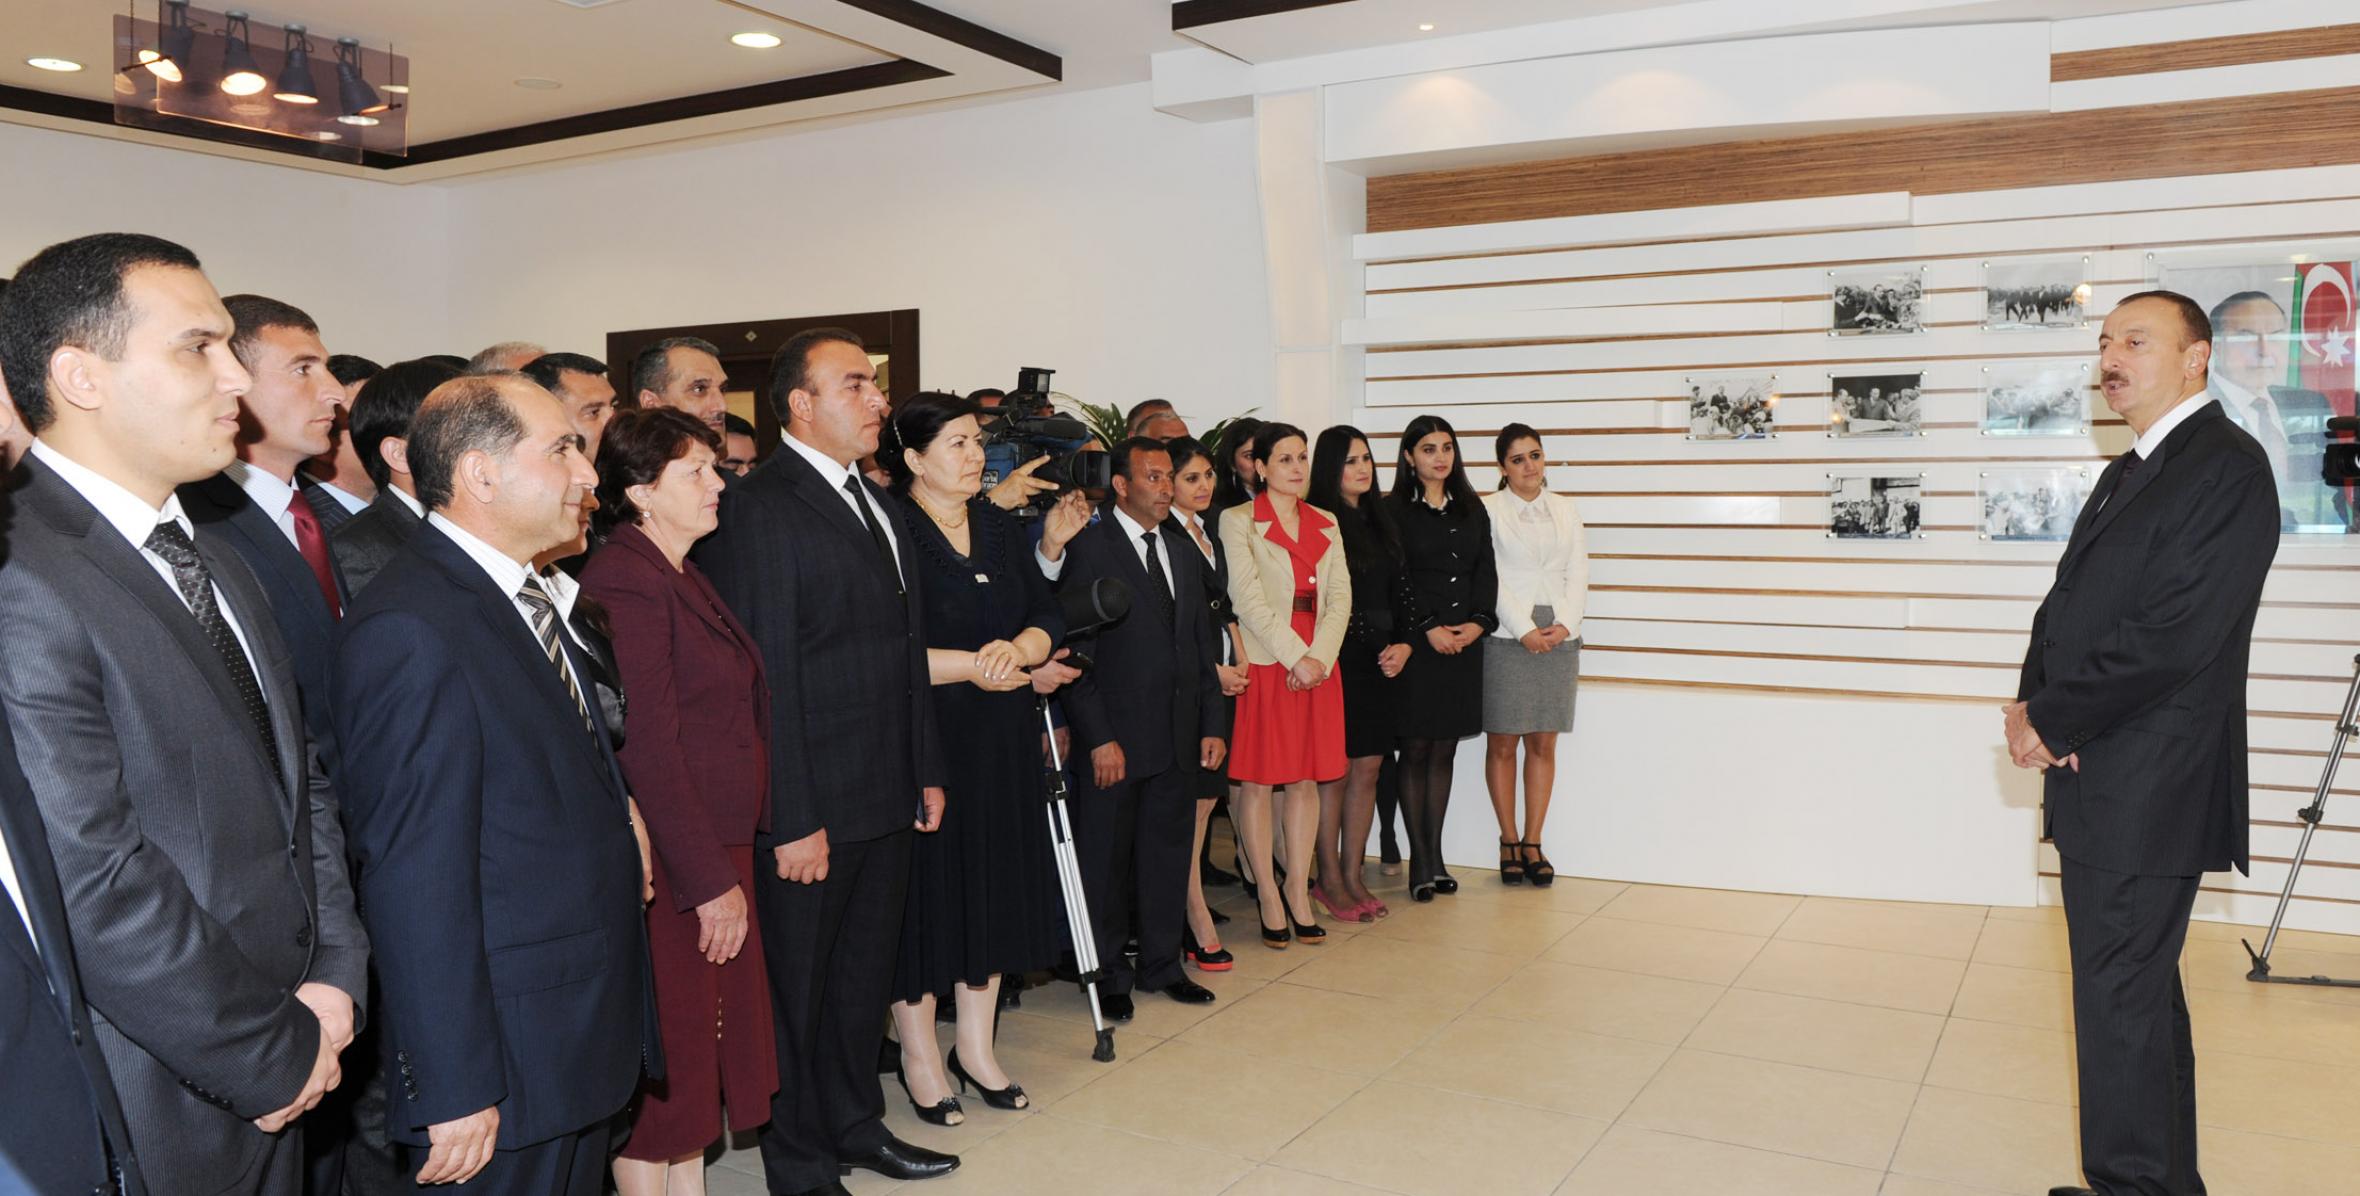 Speech by Ilham Aliyev at the opening of the Gobustan sports center